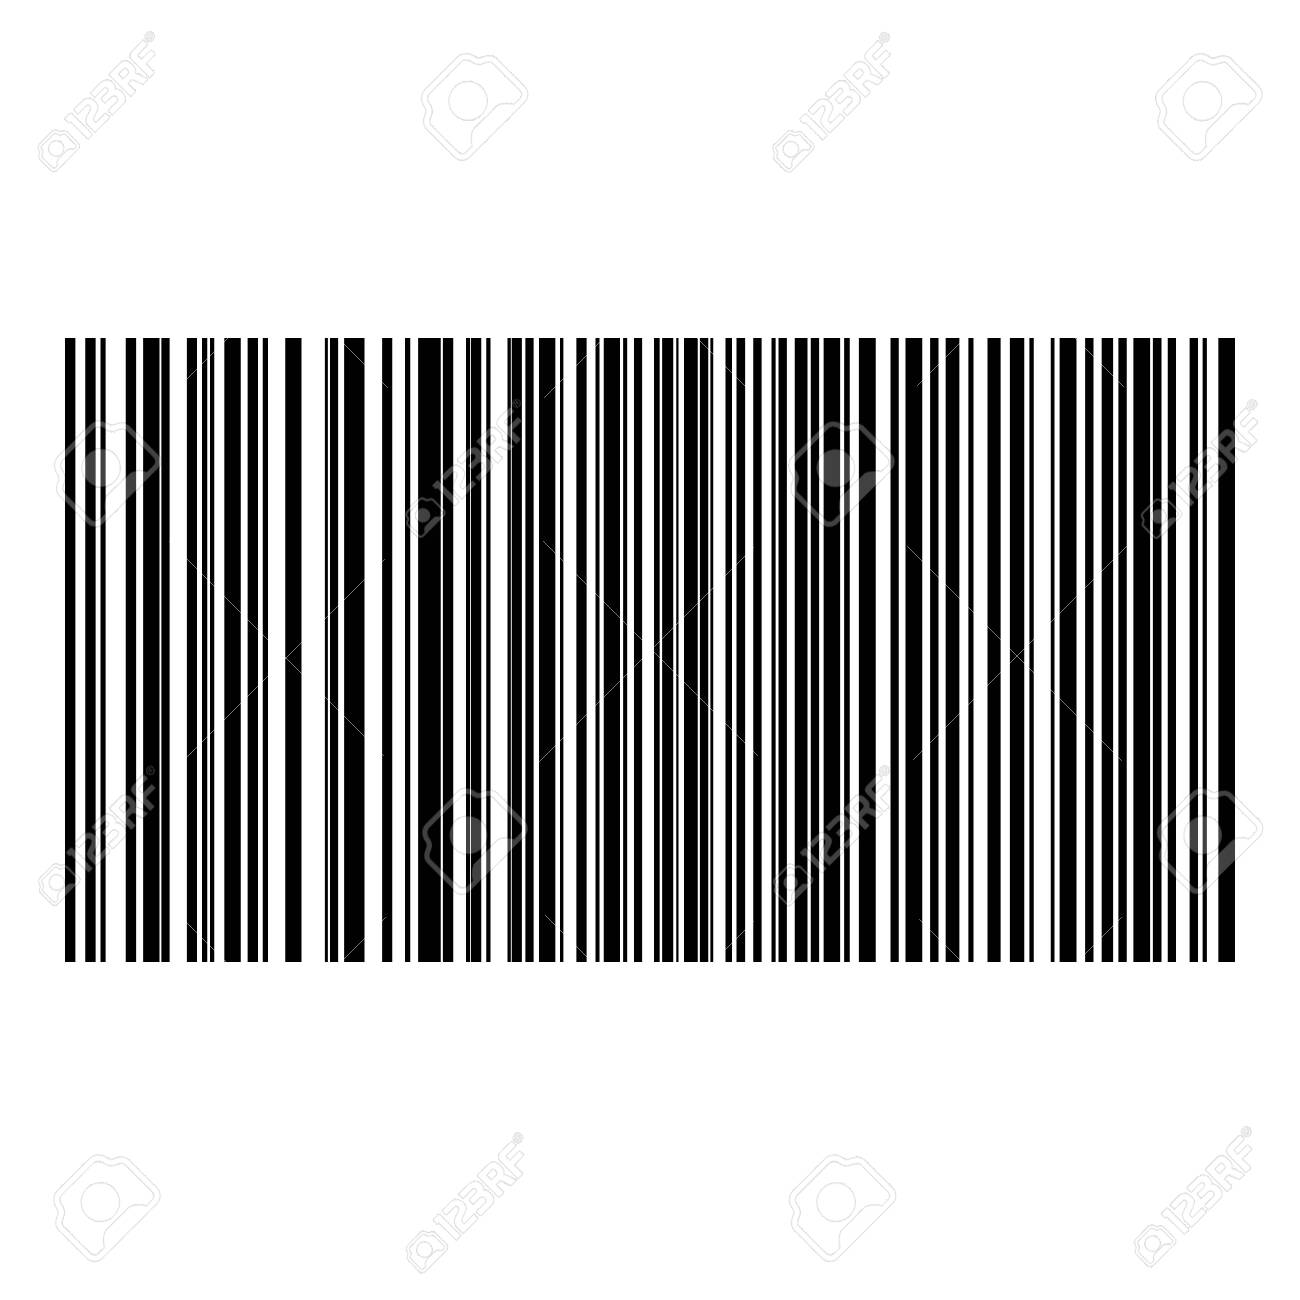 Types of Barcodes Barcode software solution provider